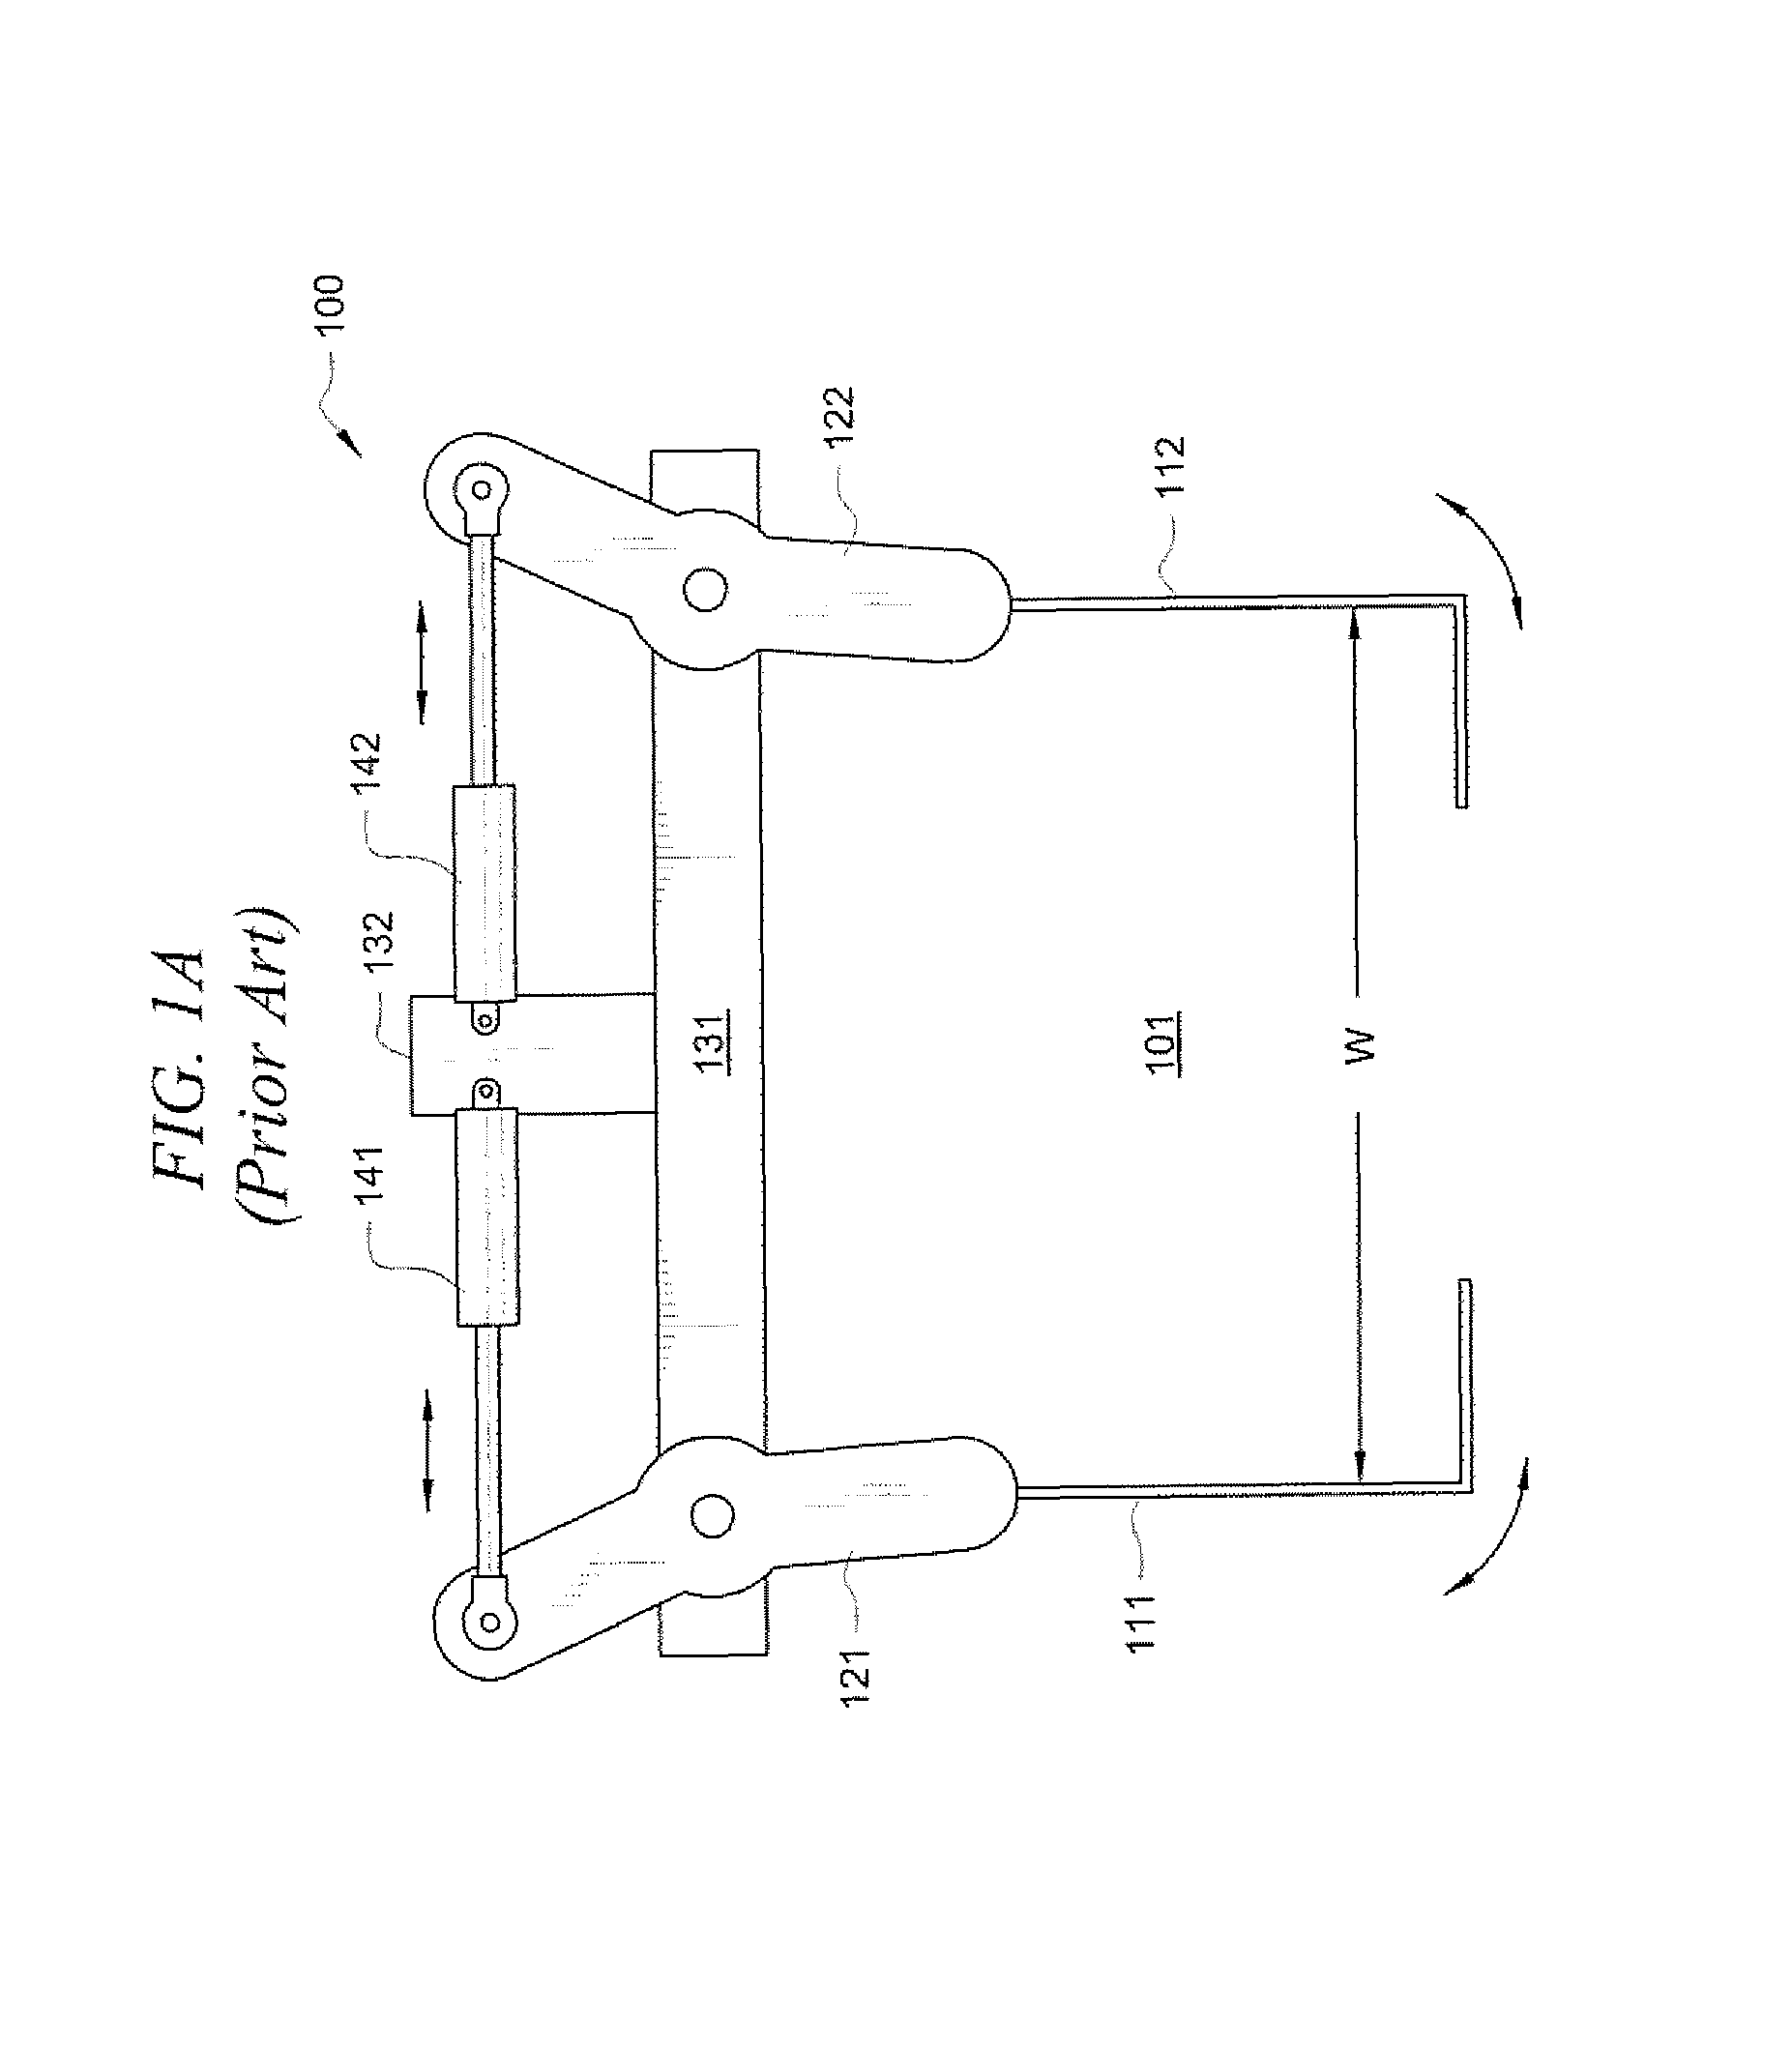 Adjustable tine clamp systems and methods